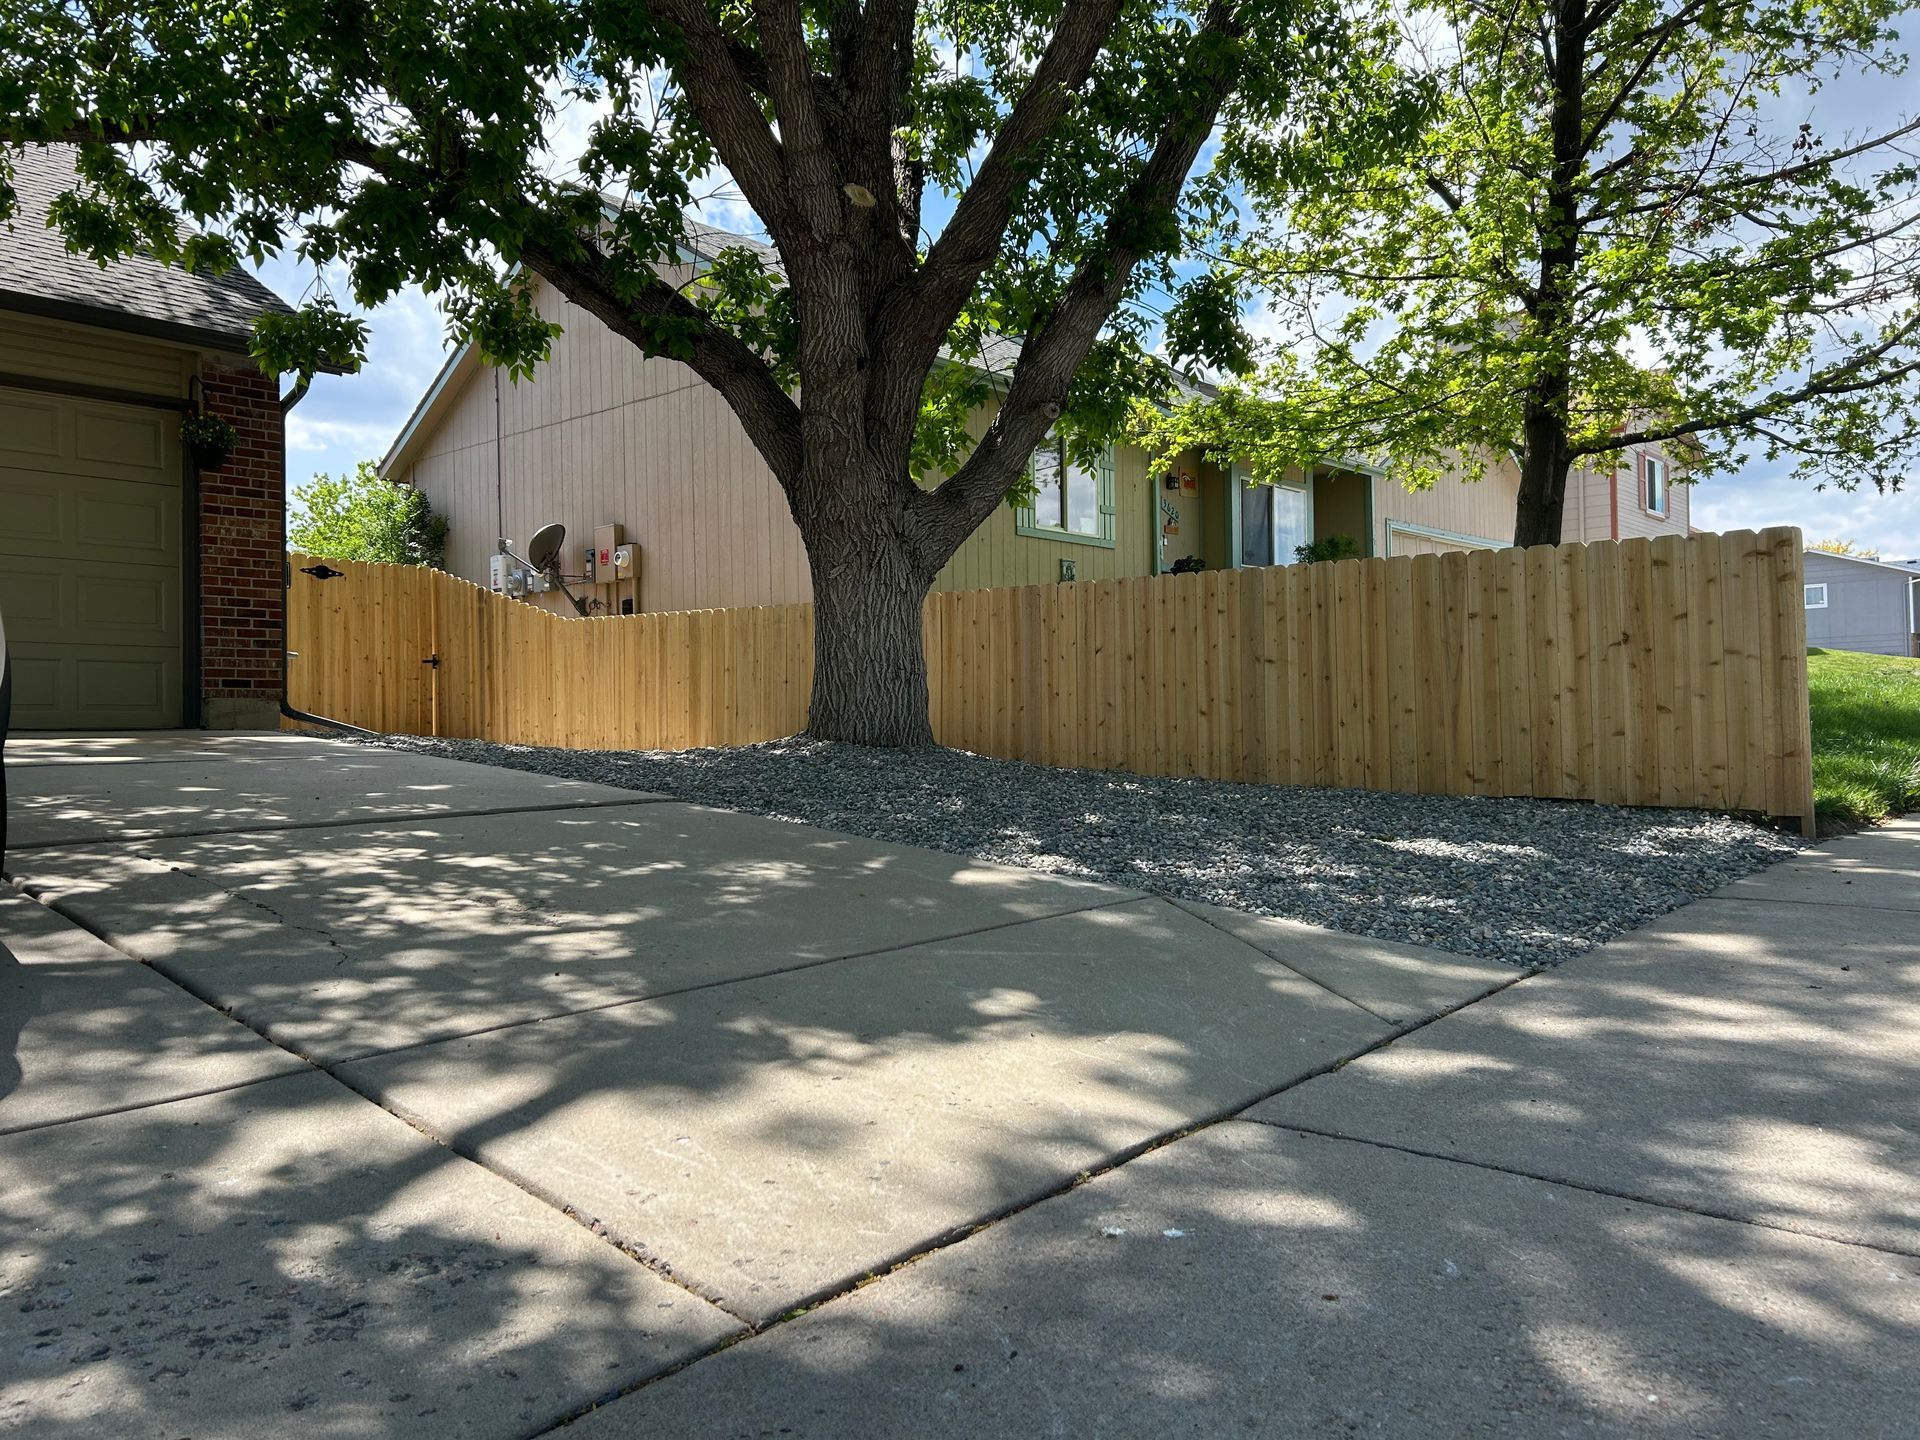 A wooden fence surrounds a tree in front of a house